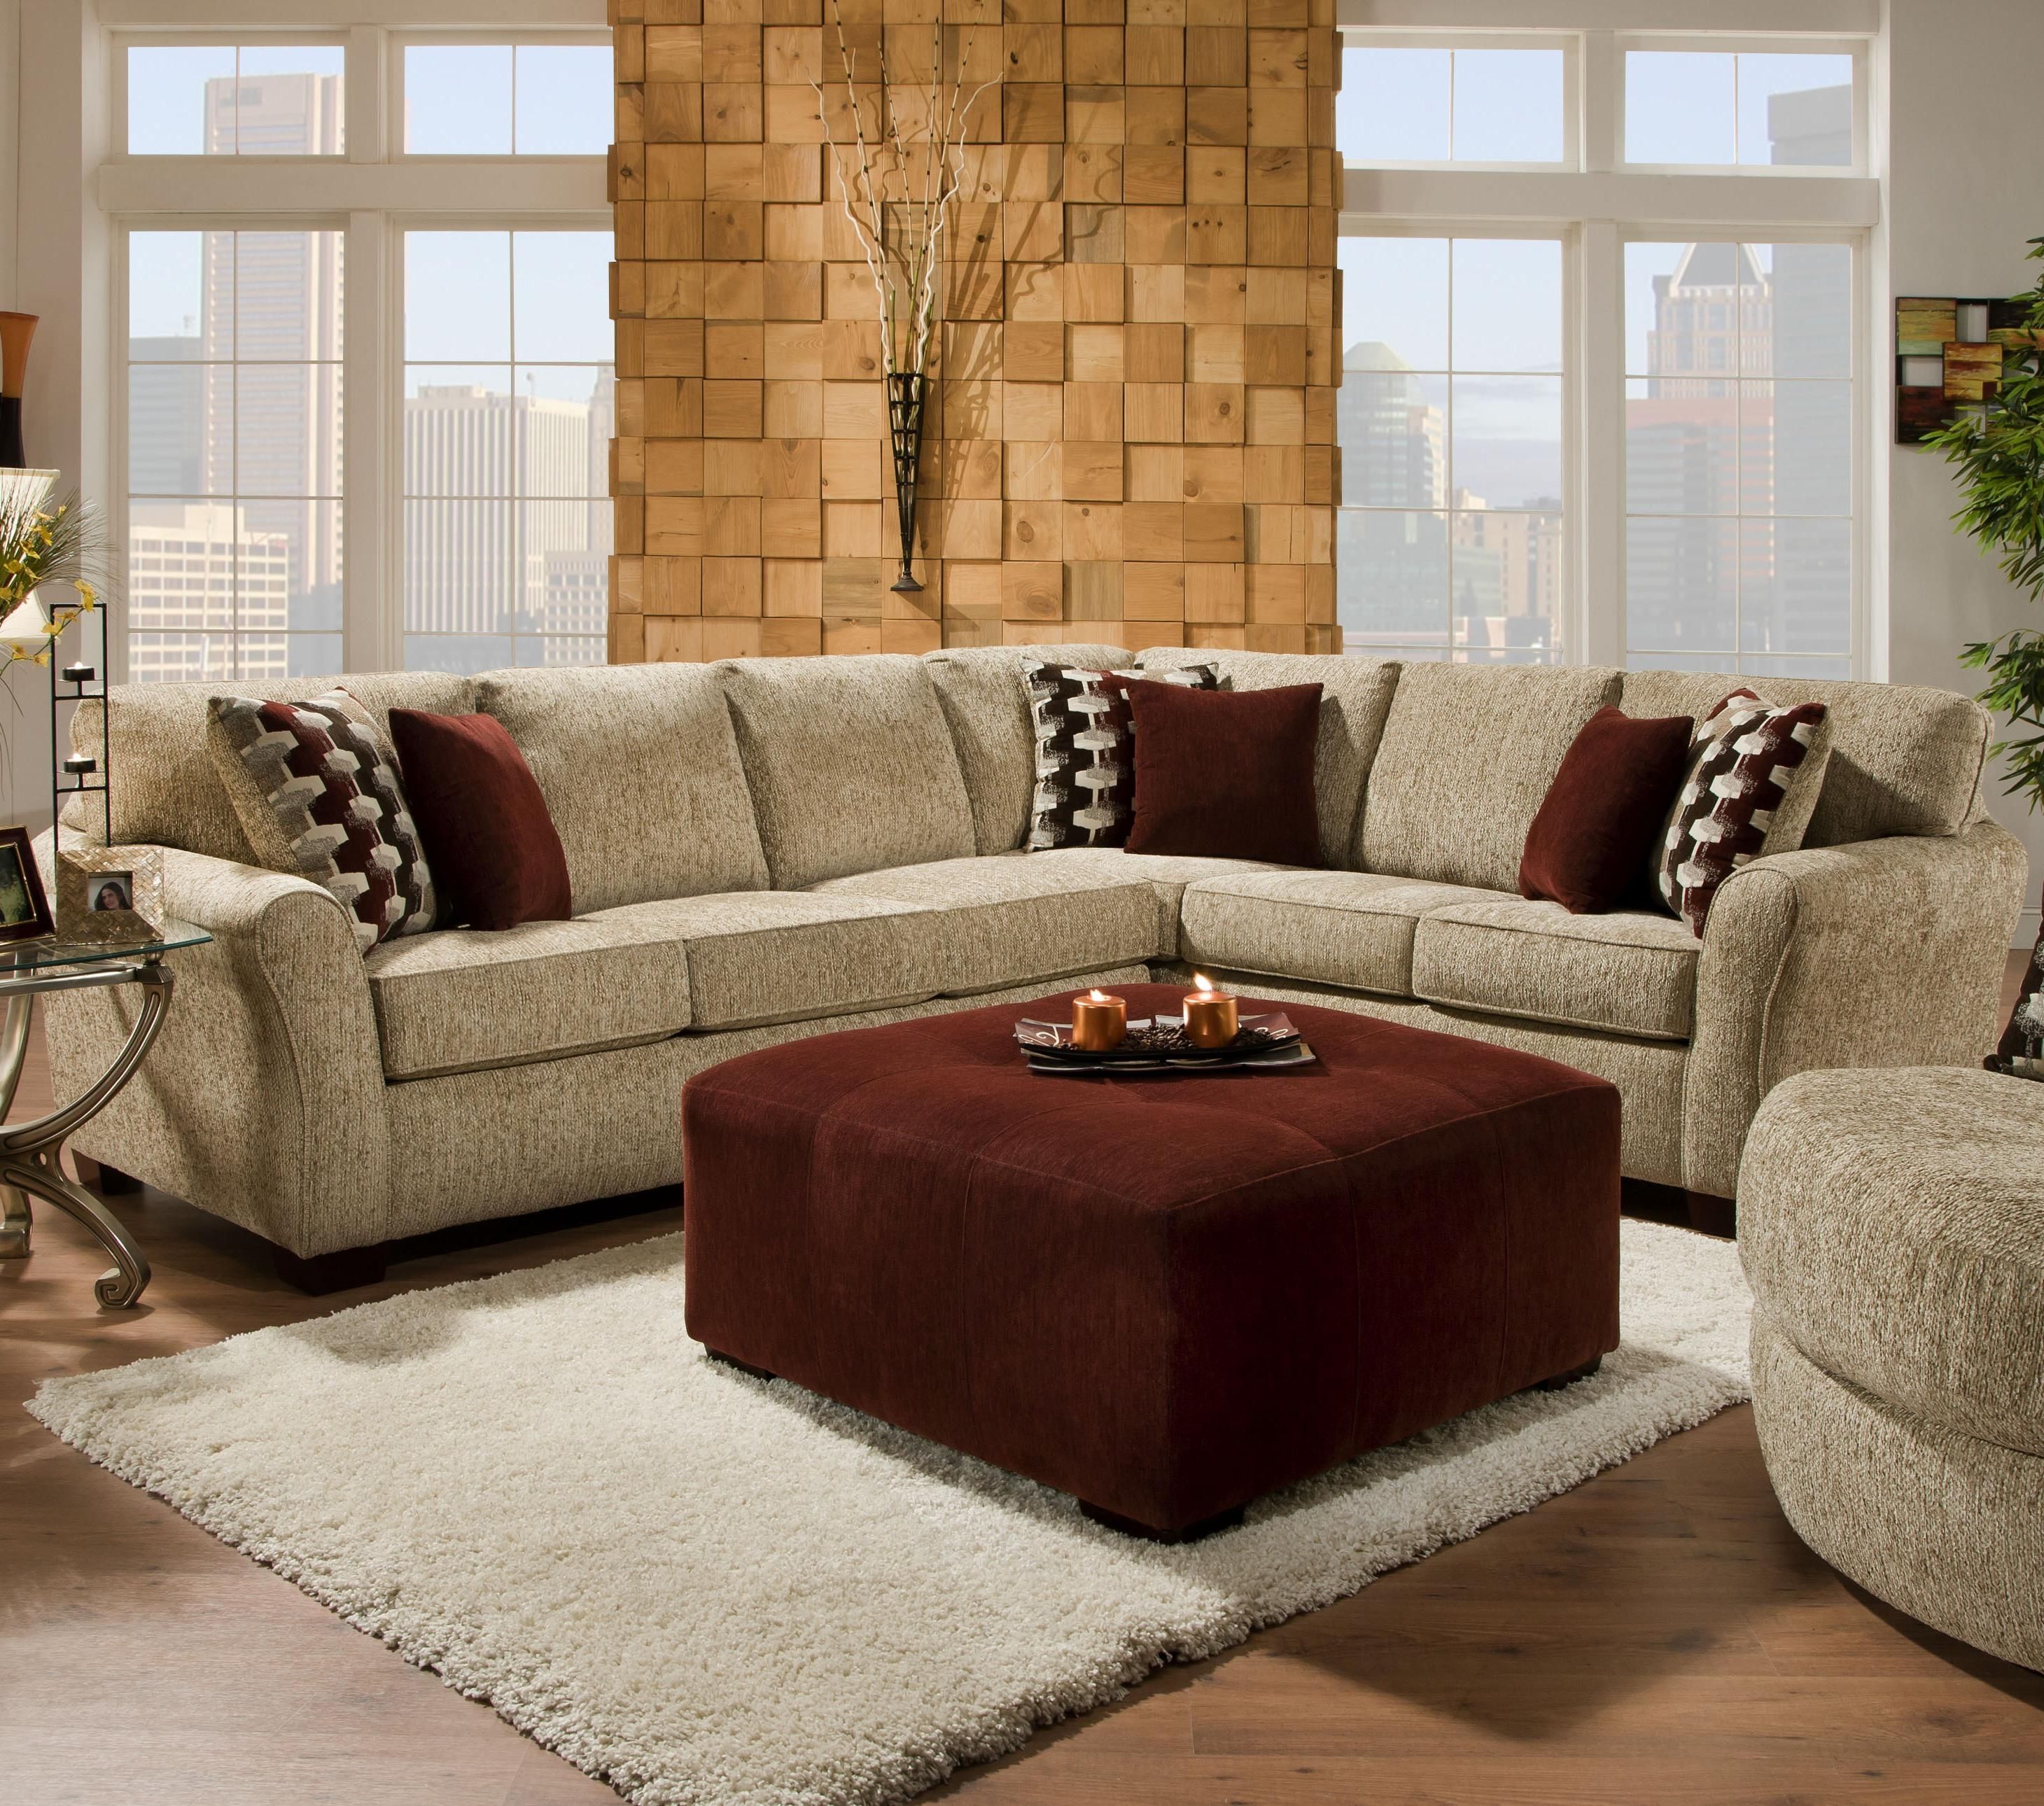 2500 Contemporary Styled Sectional Sofa With Sleepercorinthian Within Johnny Janosik Sectional Sofas (Photo 4 of 10)